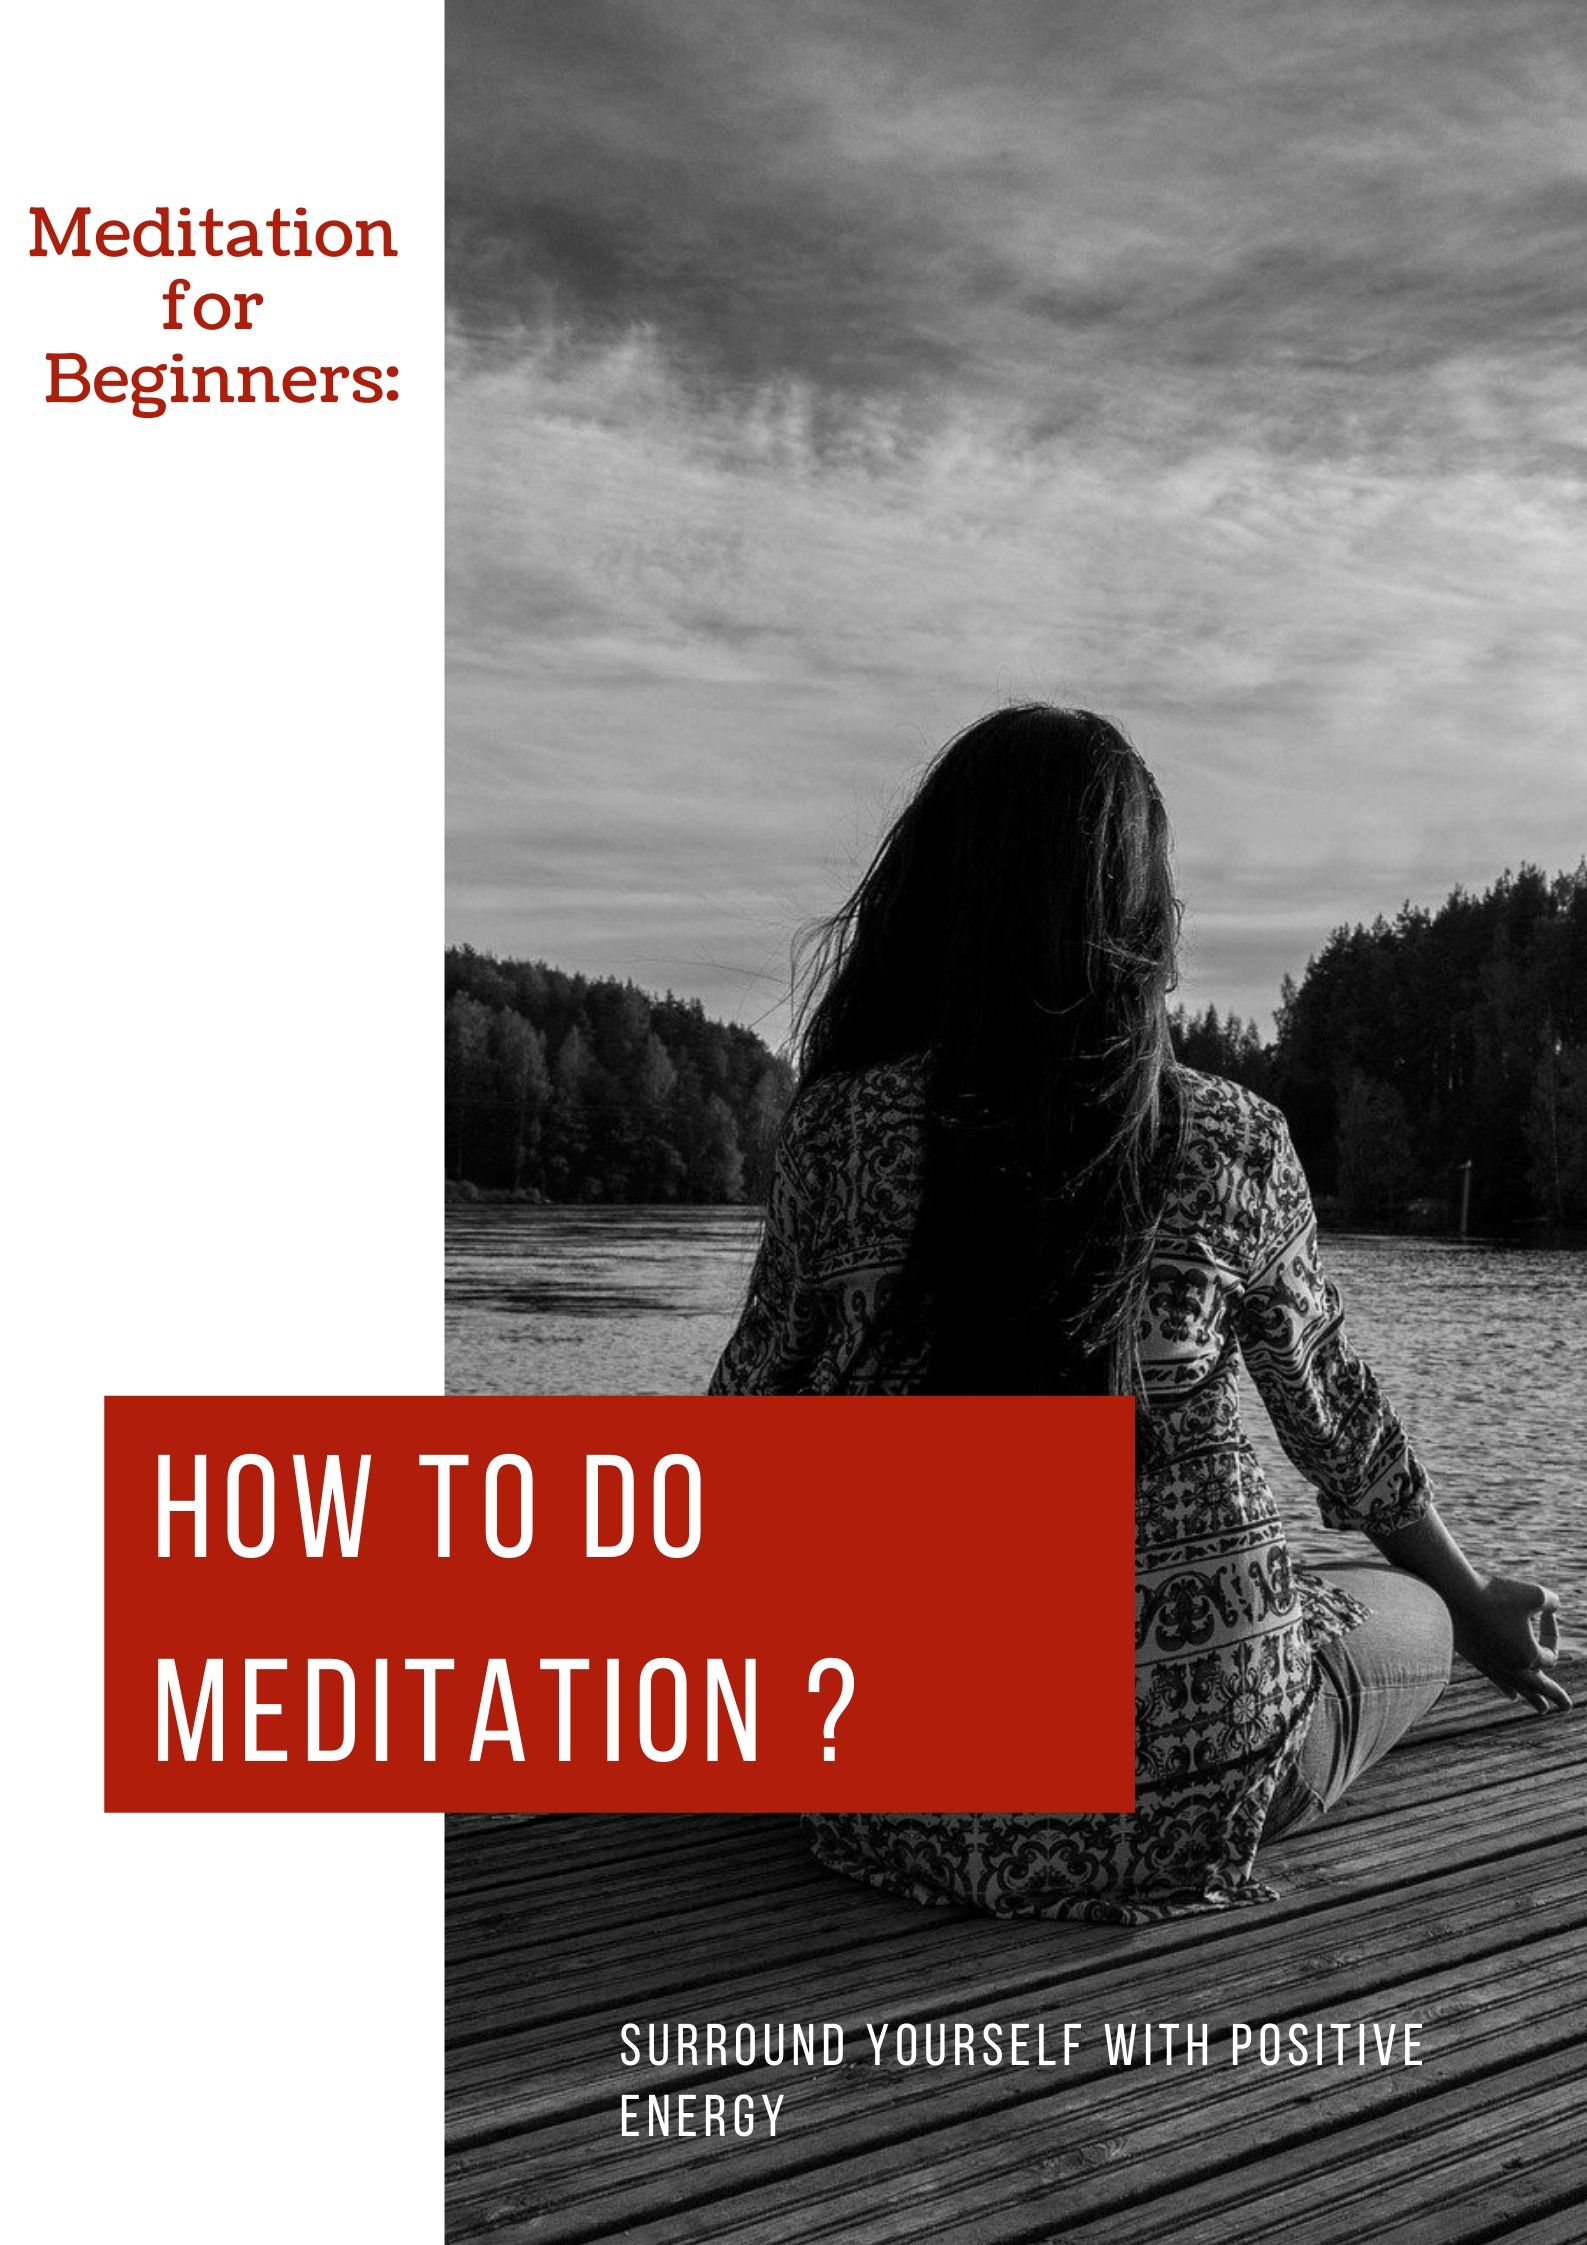 Meditation for Beginners with the basics of starting Meditation and reaping the benefits of Mindfulness #meditate #meditation #concentration #yoga 